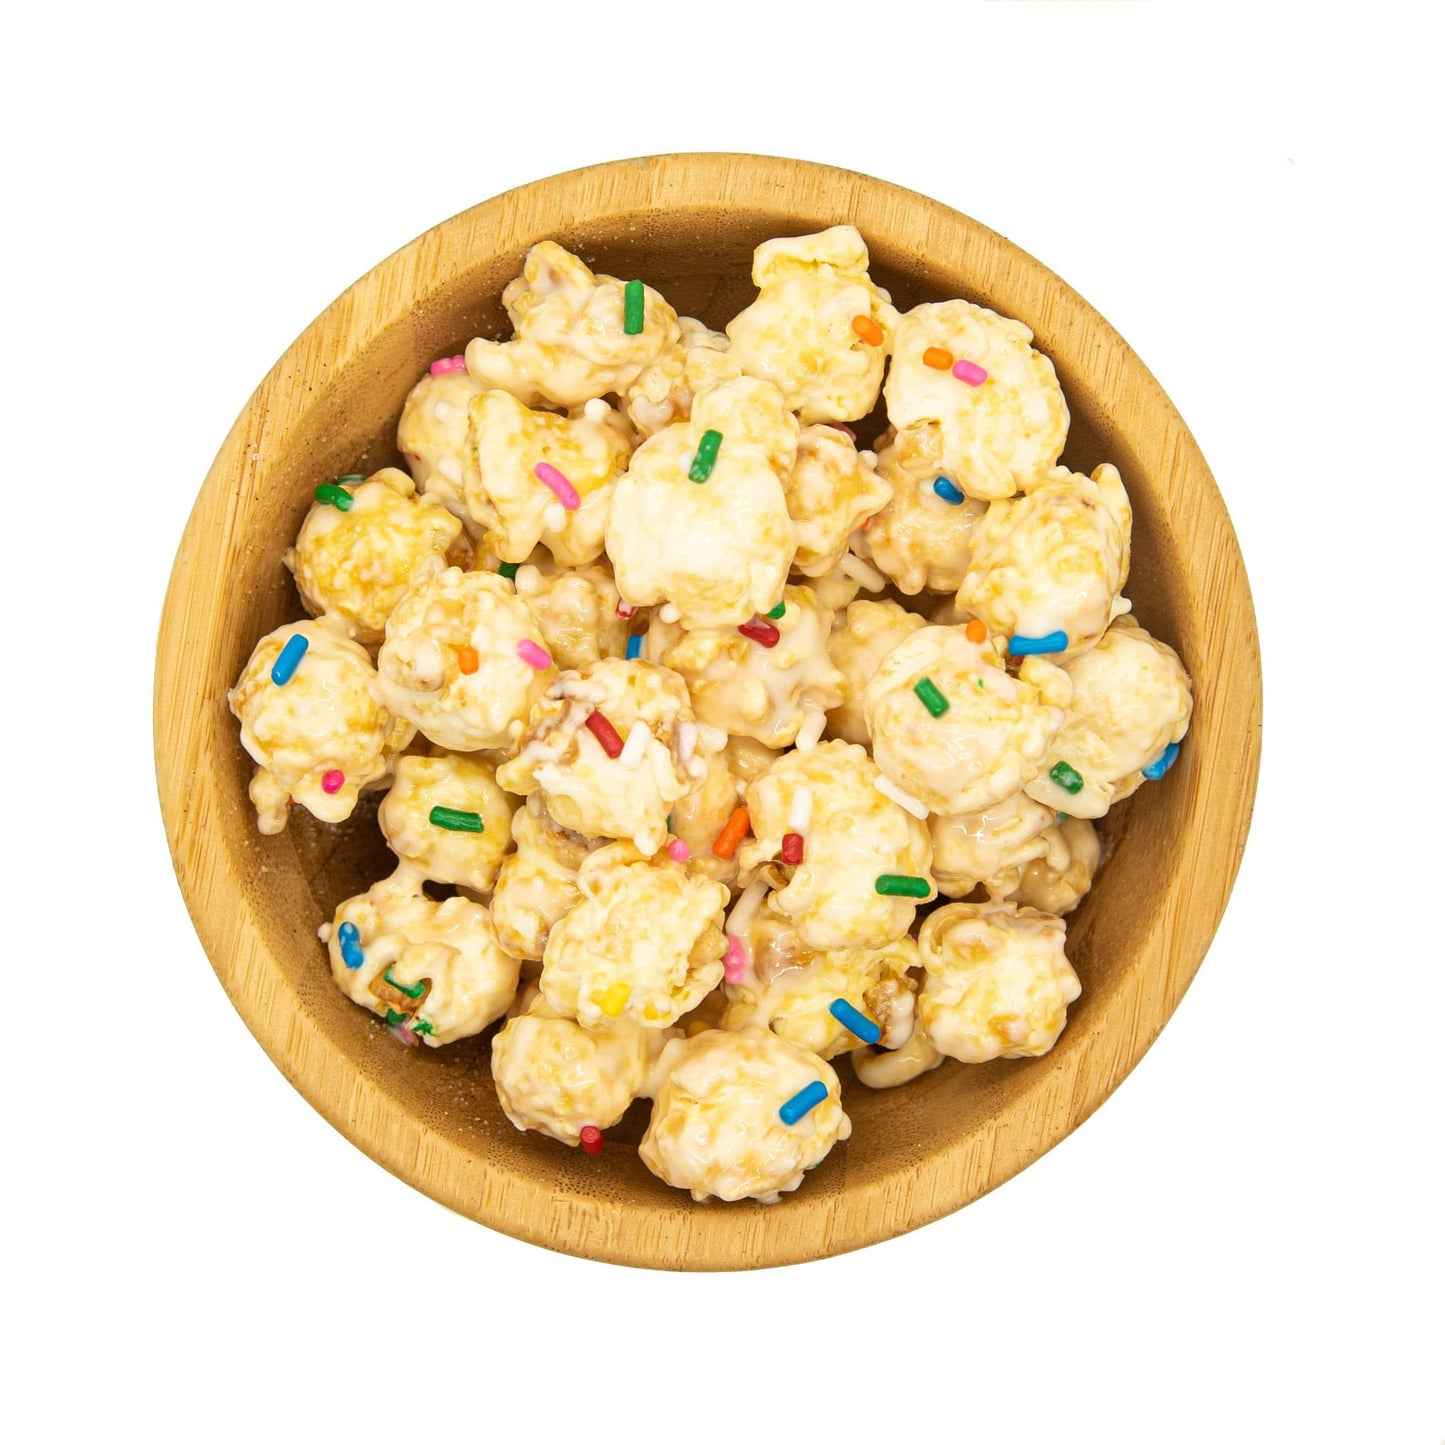 Birthday Cake Gourmet Popcorn with white chocolate and sprinkles from the best online fundraiser high profit fundraiser for school it is double good